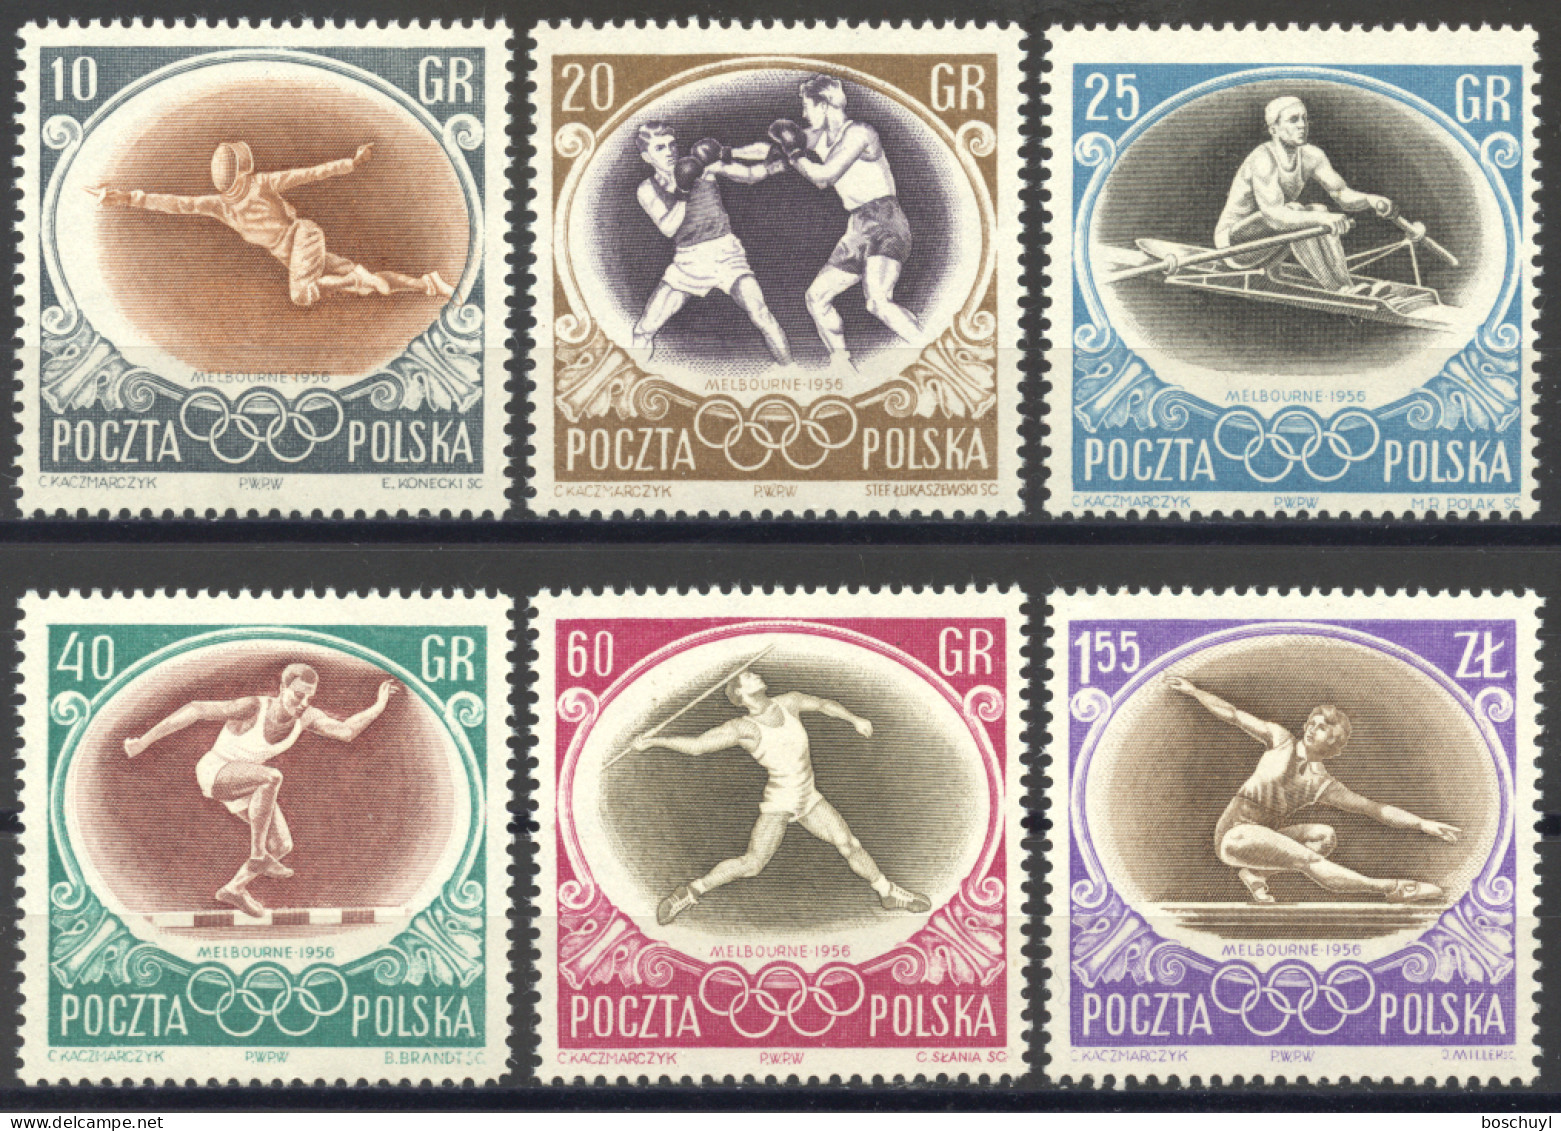 Poland, 1956, Olympic Summer Games Melbourne, Sports, MNH, Michel 984-989 - Nuovi